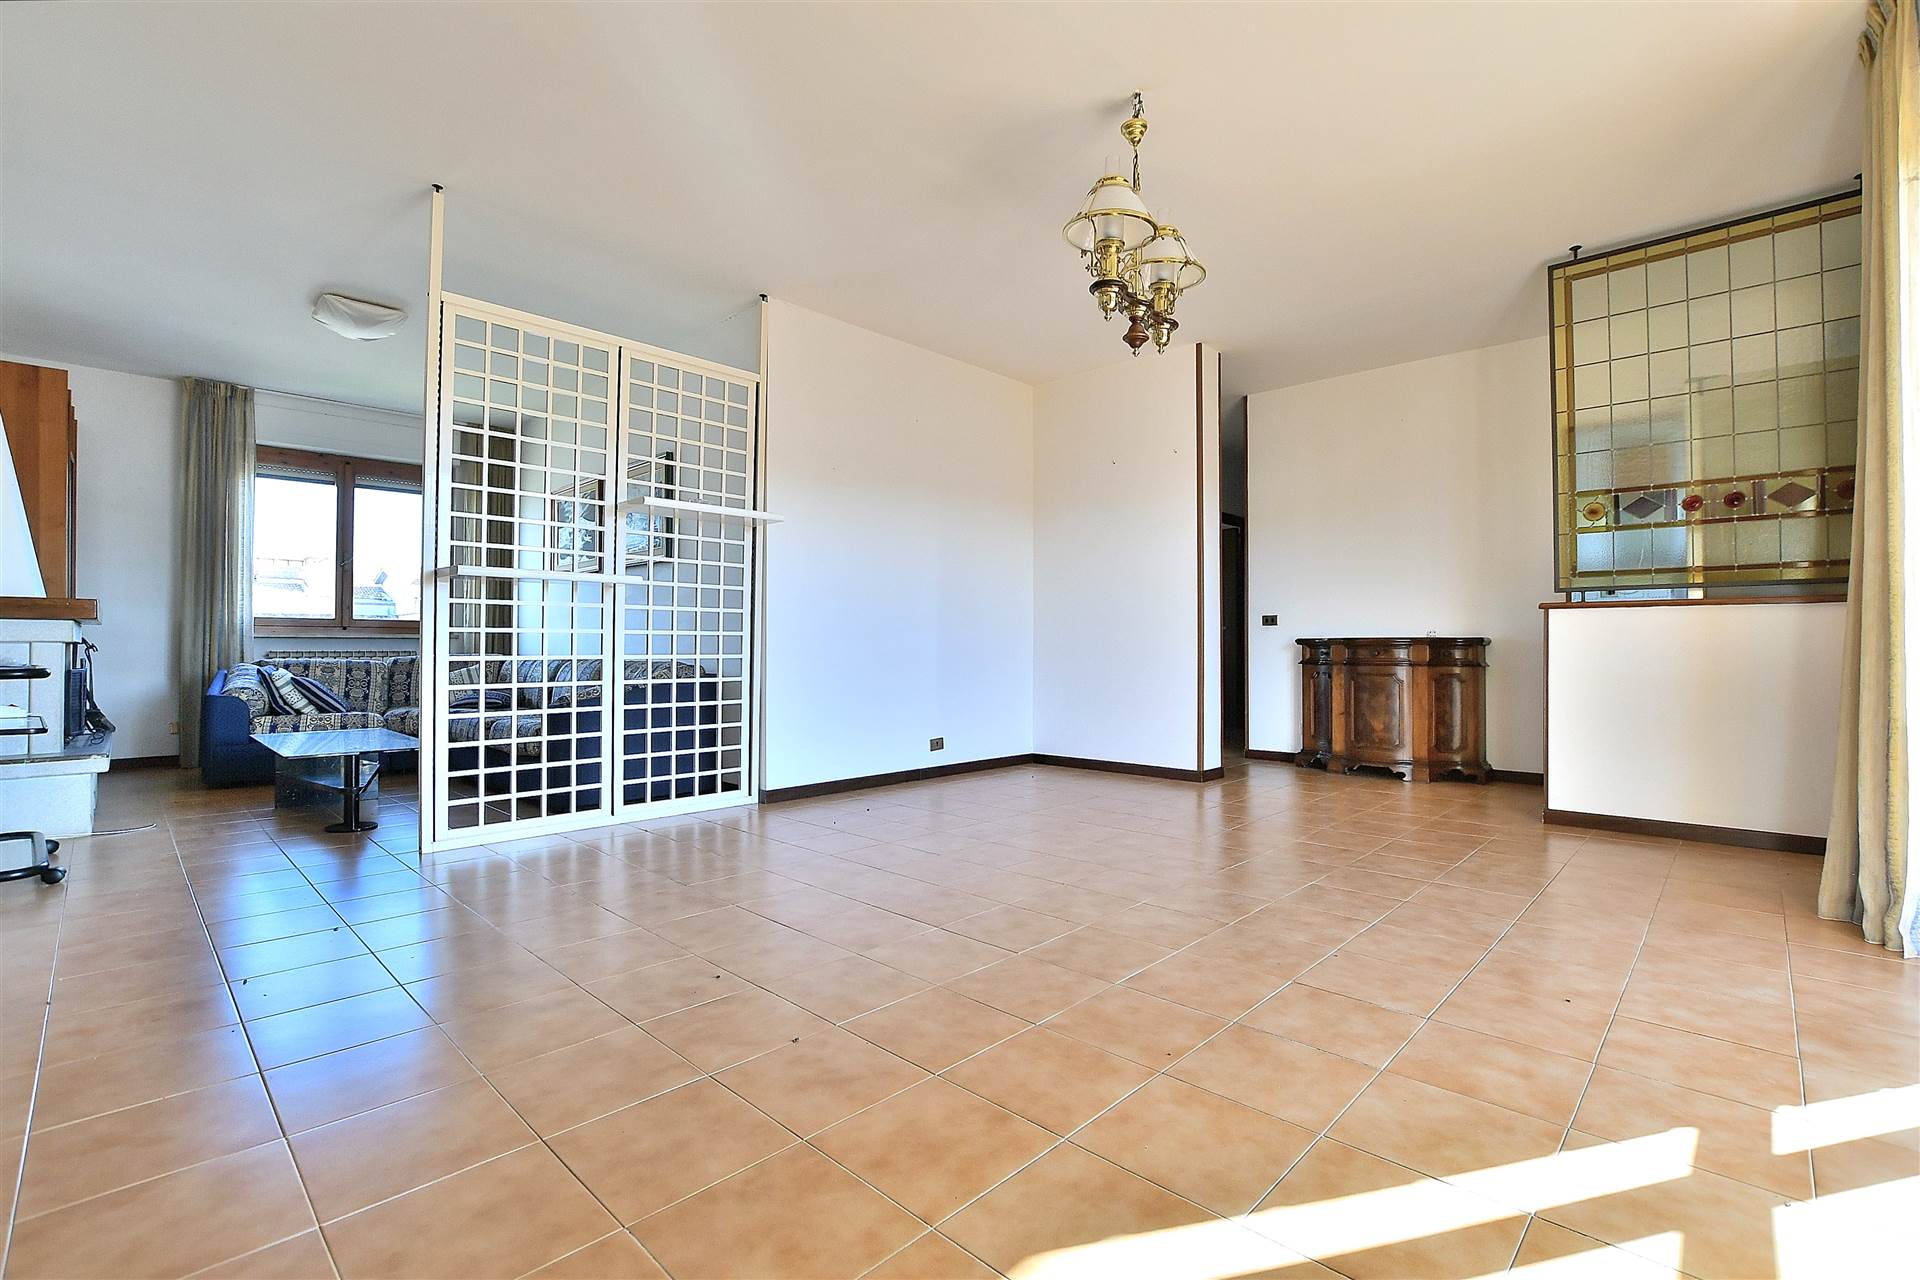 MONTERONI D'ARBIA, Apartment for sale of 104 Sq. mt., Habitable, Heating Individual heating system, Energetic class: G, Epi: 175 kwh/m2 year, placed at 4° on 4, composed by: 5 Rooms, Little kitchen, ,